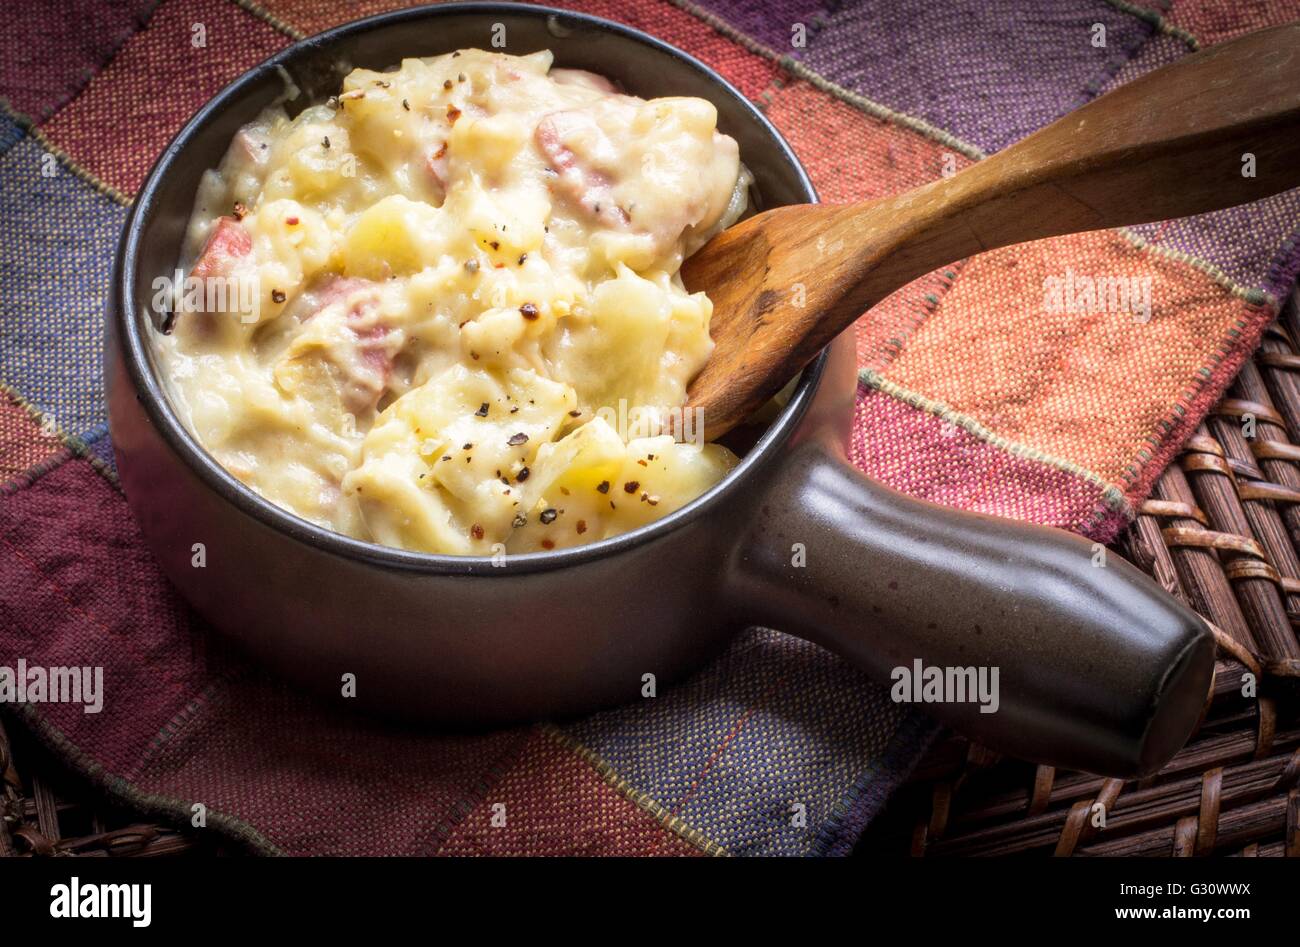 Scalloped Potatoes And Ham. A easy and delicious use for leftover holiday ham. Stock Photo